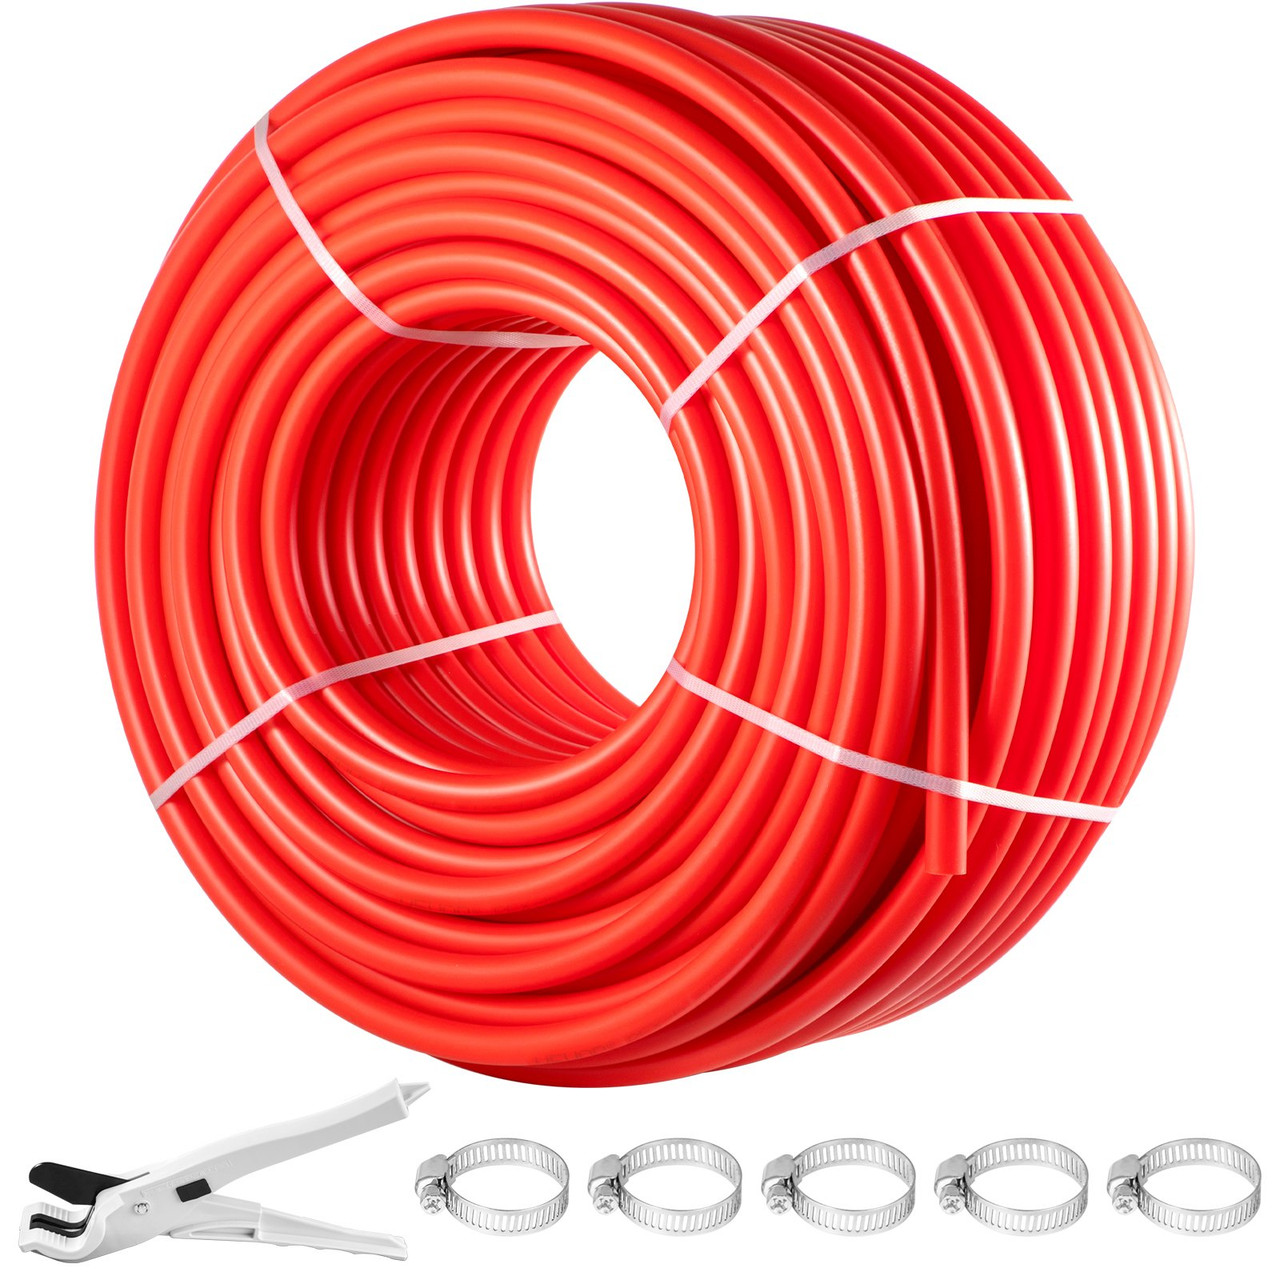 PEX Pipe, 1 Inch x 500 FT PEX Tubing, Non Oxygen Barrier Red PEX-B Pipe, Flexible PEX Water Line for RV Sewer Hose, Plumbing, Radiant Heating